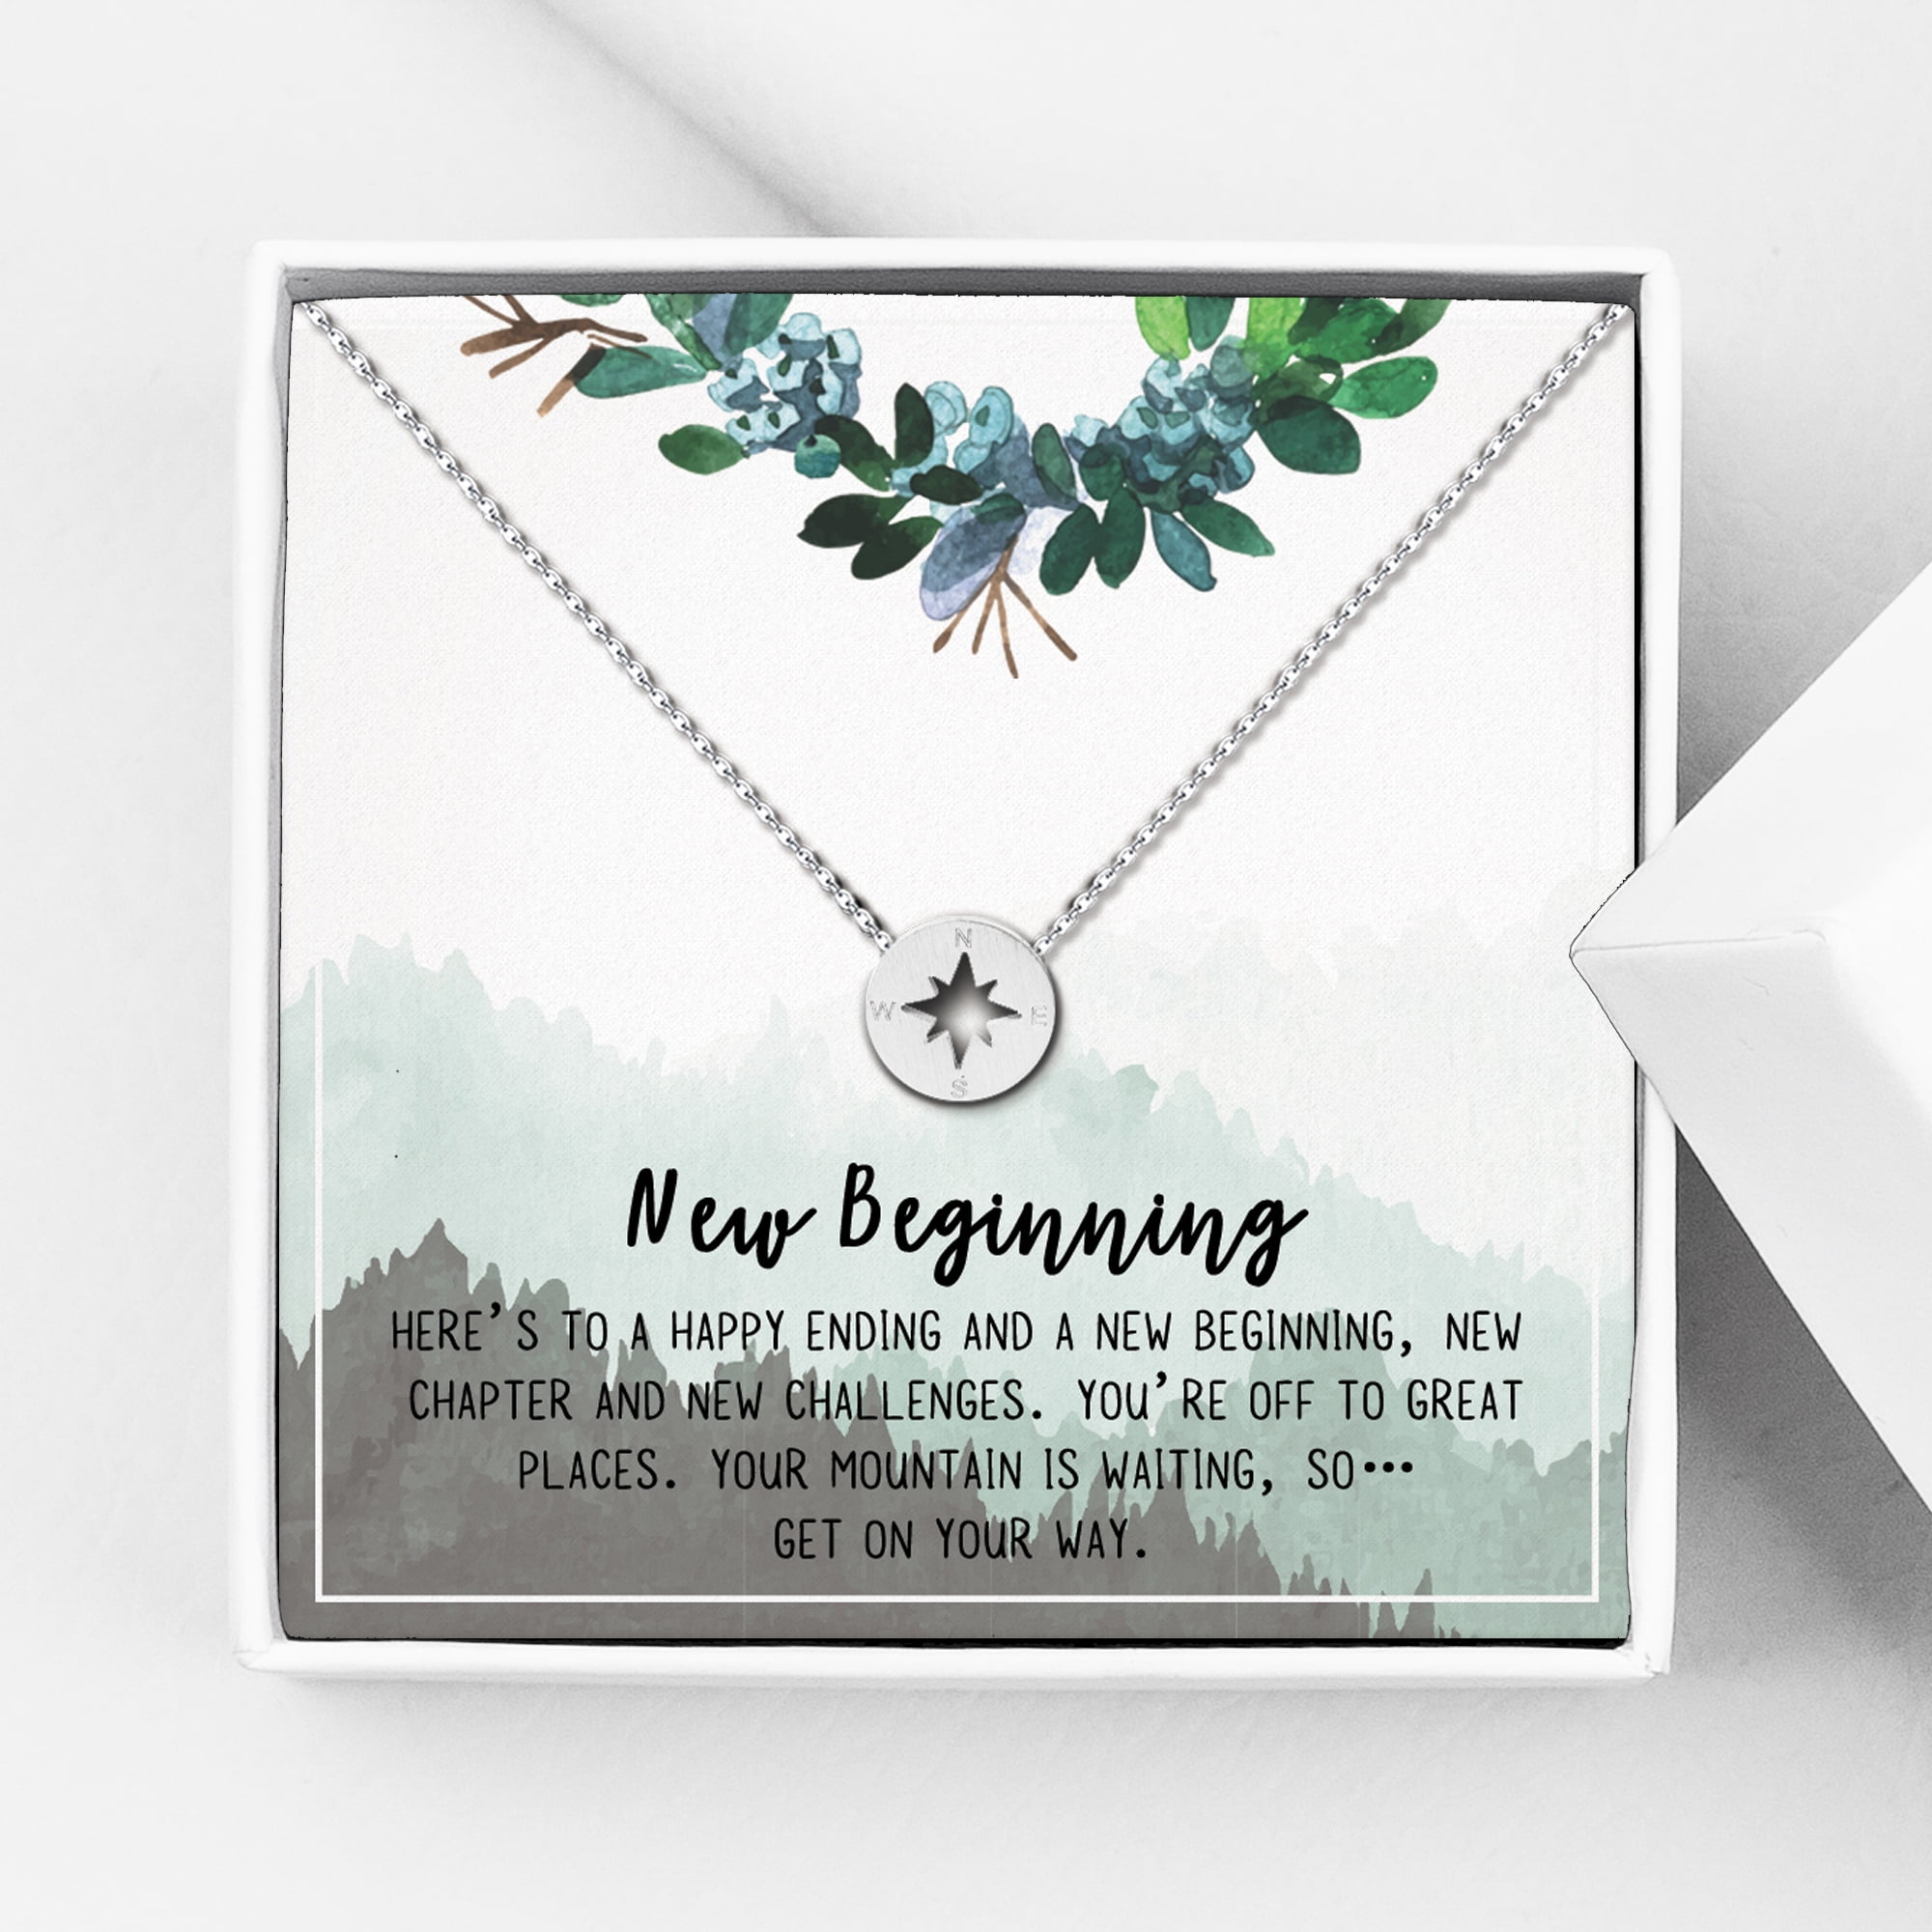 IEFLIFE Graduation Gifts for Her Arrow Necklace Senior 2020 Gifts Sideways Arrow Necklace College High School Graduation Gifts for Her Inspirational Graduation Gifts Necklace with Message Card 